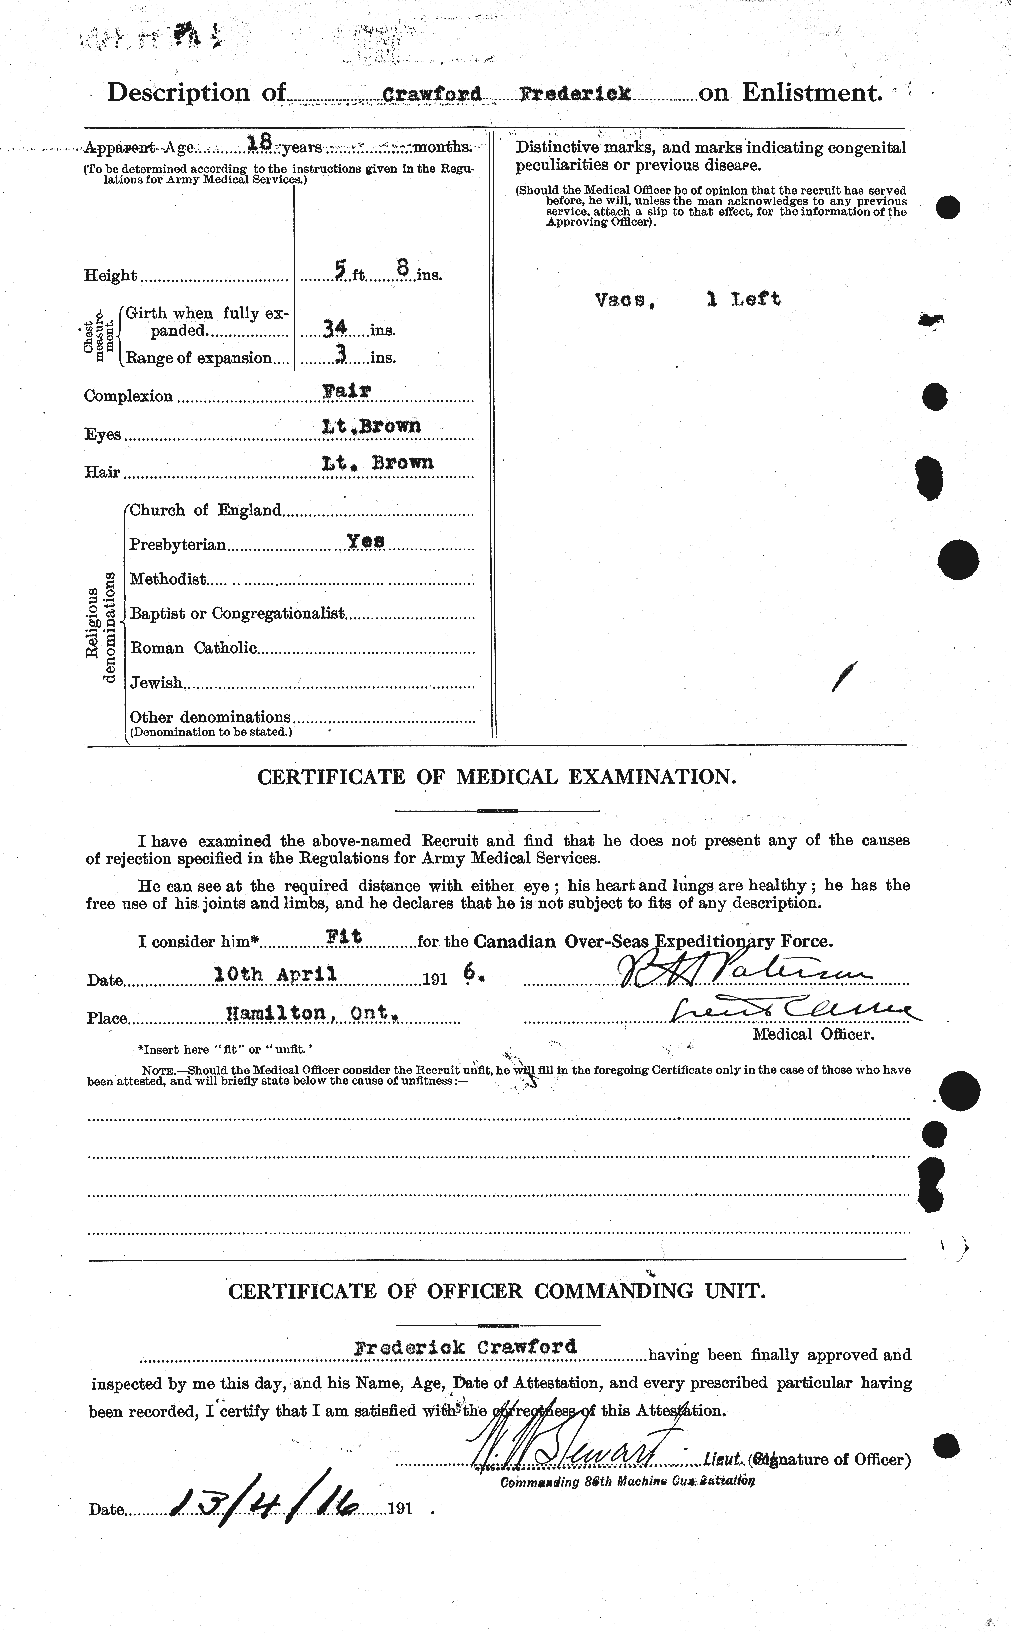 Personnel Records of the First World War - CEF 060728b